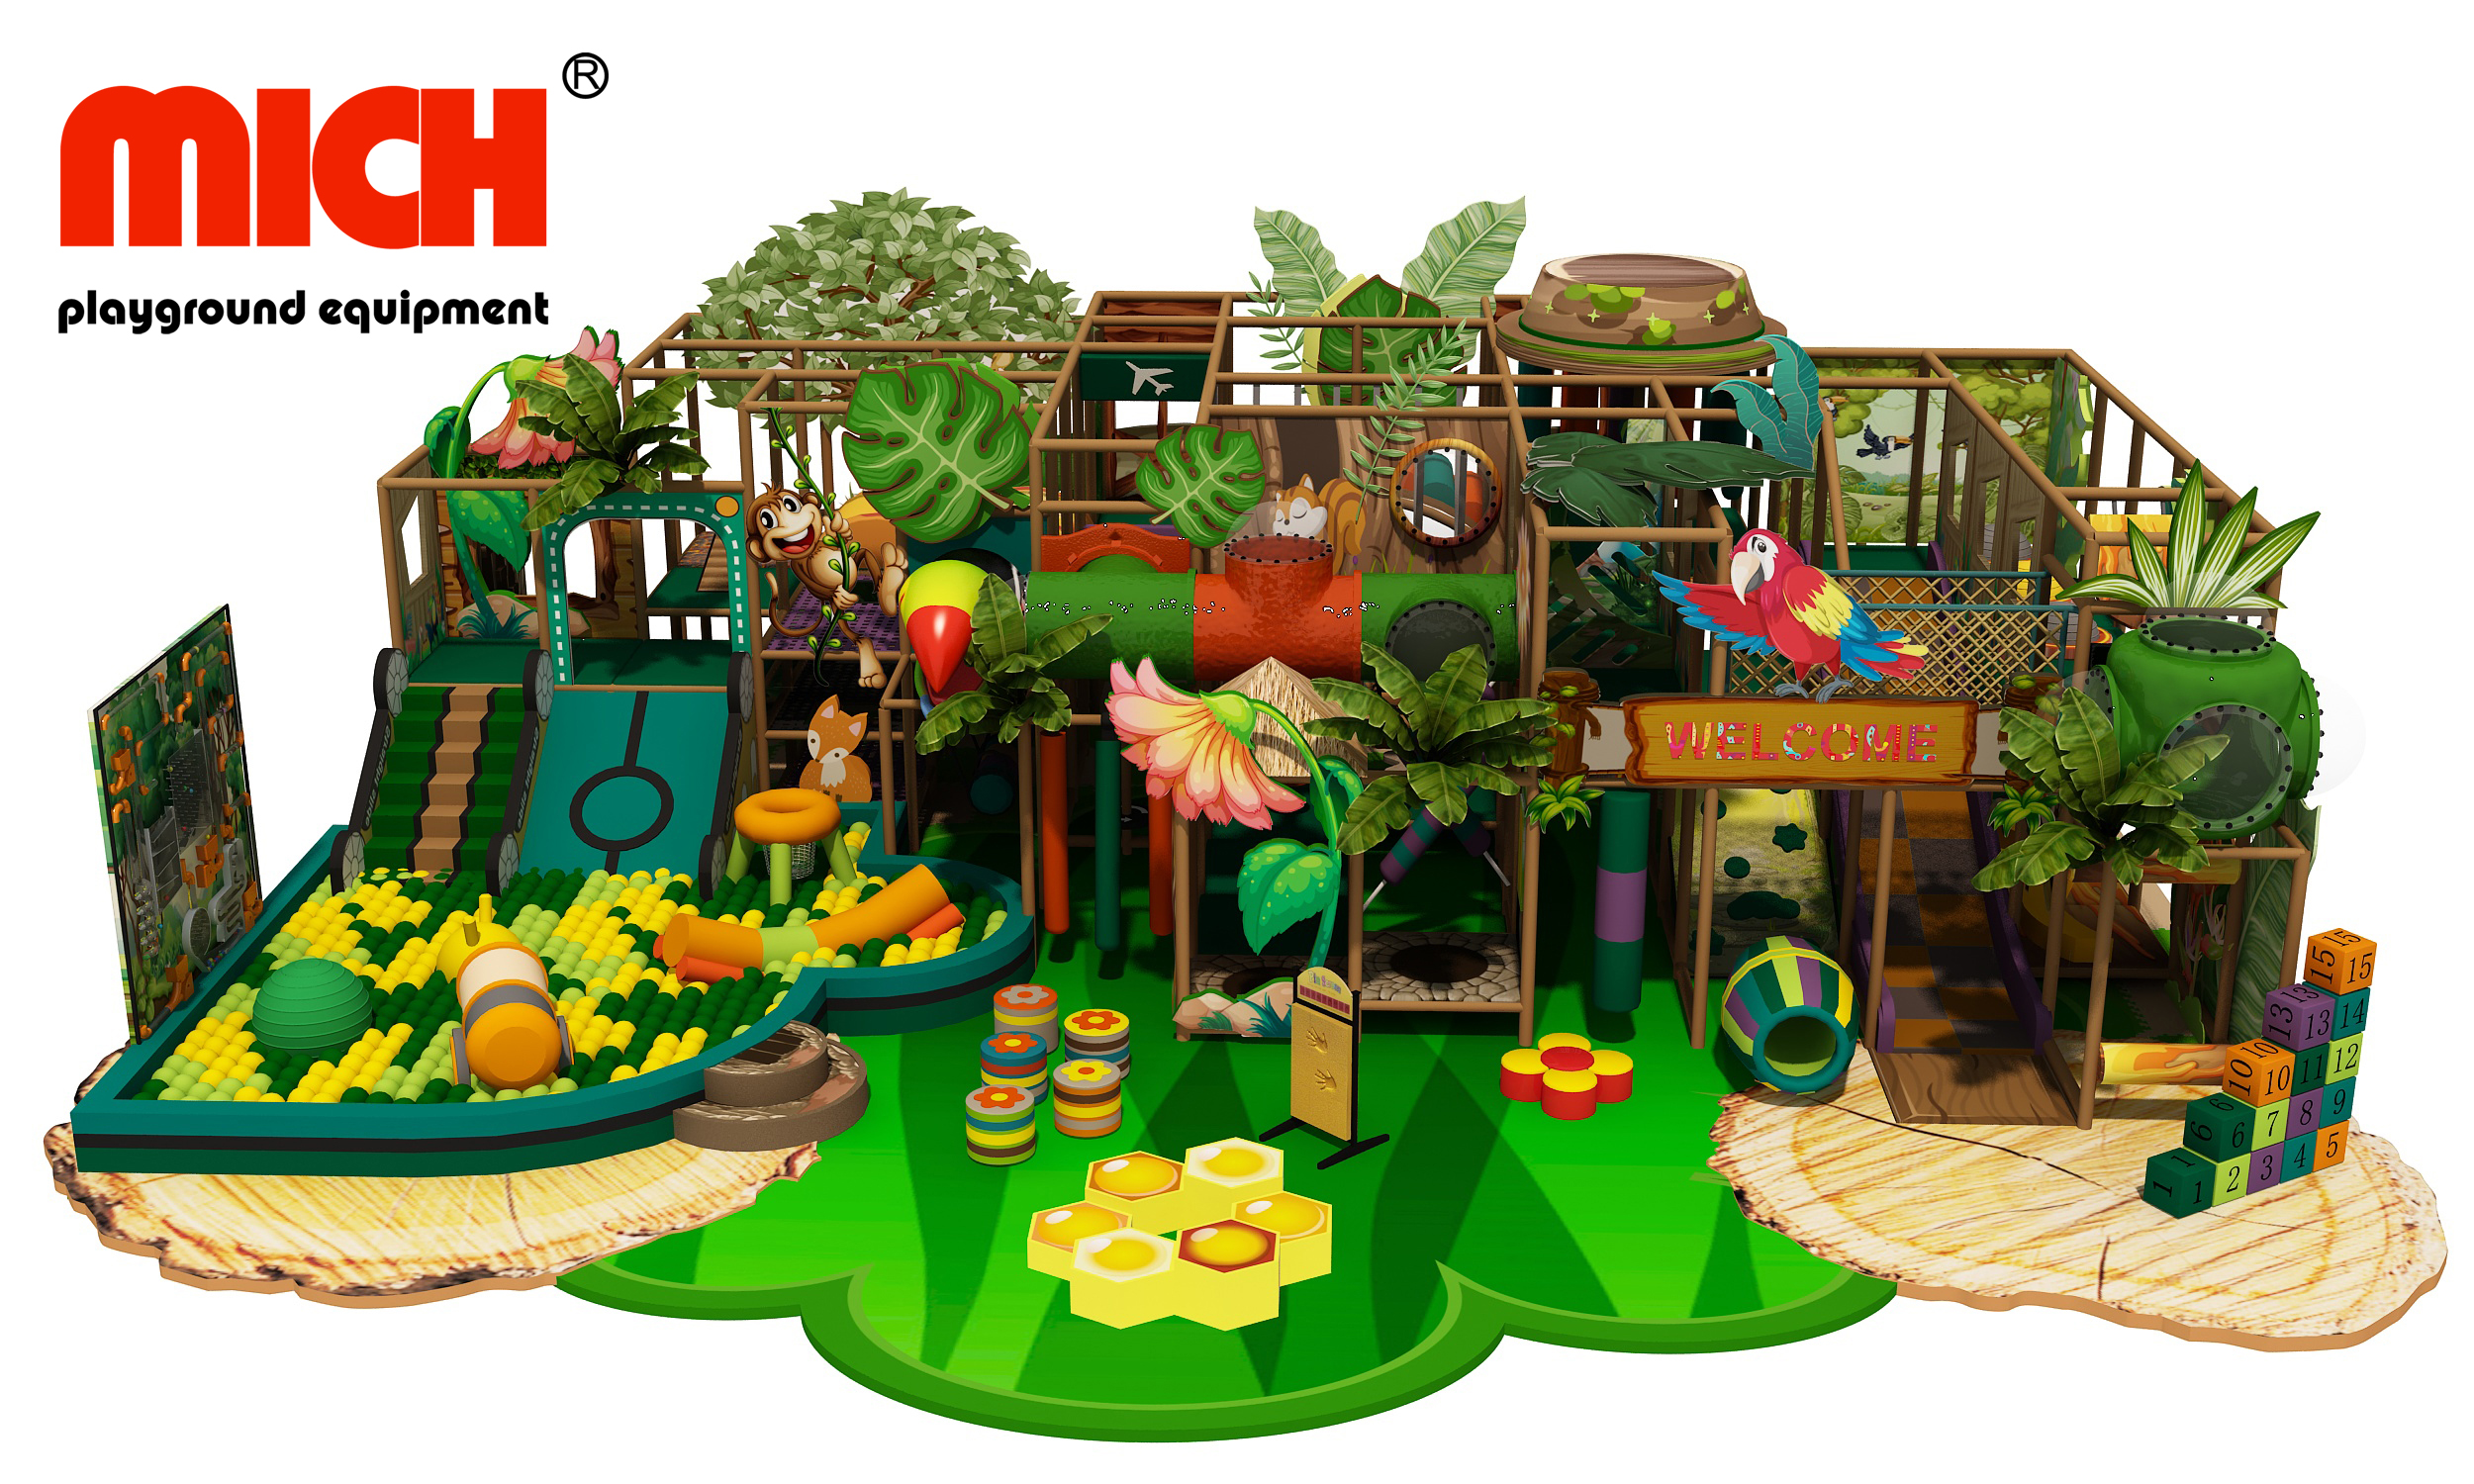 Large Indoor Jungle-themed Children's Play Center